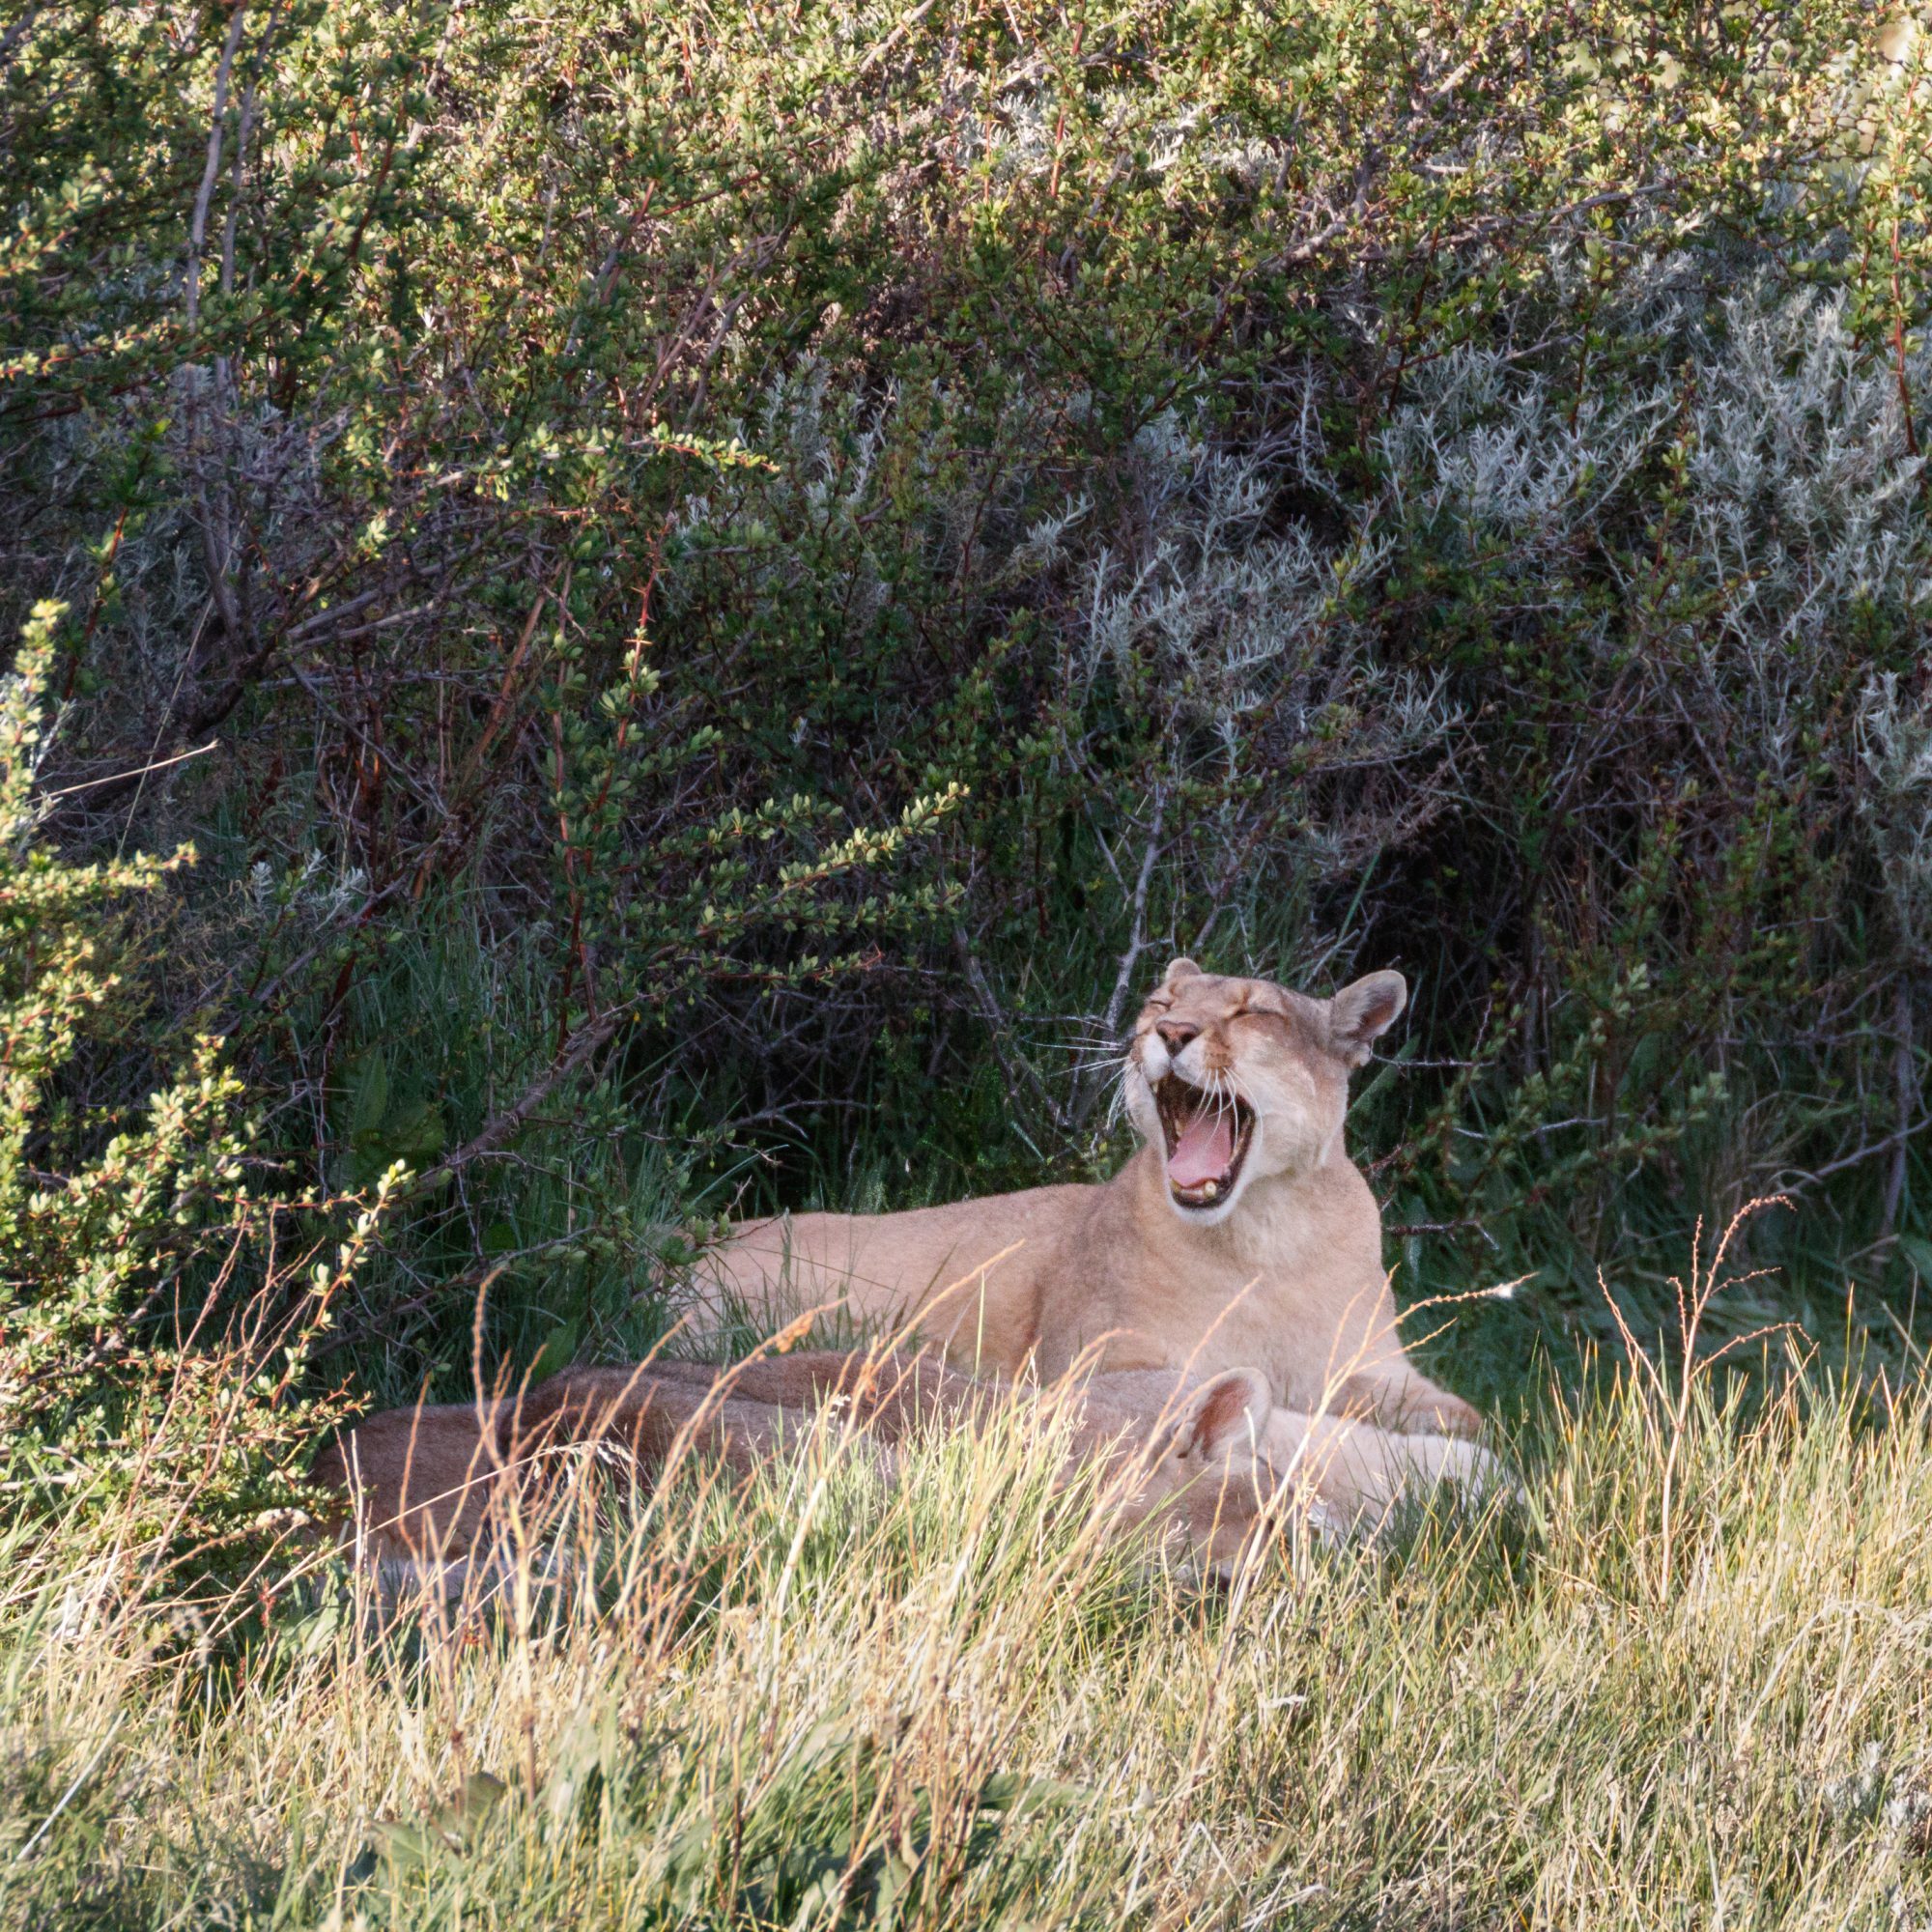 Puma family rest in the shade of a bush – Patagonia, Chile 2018